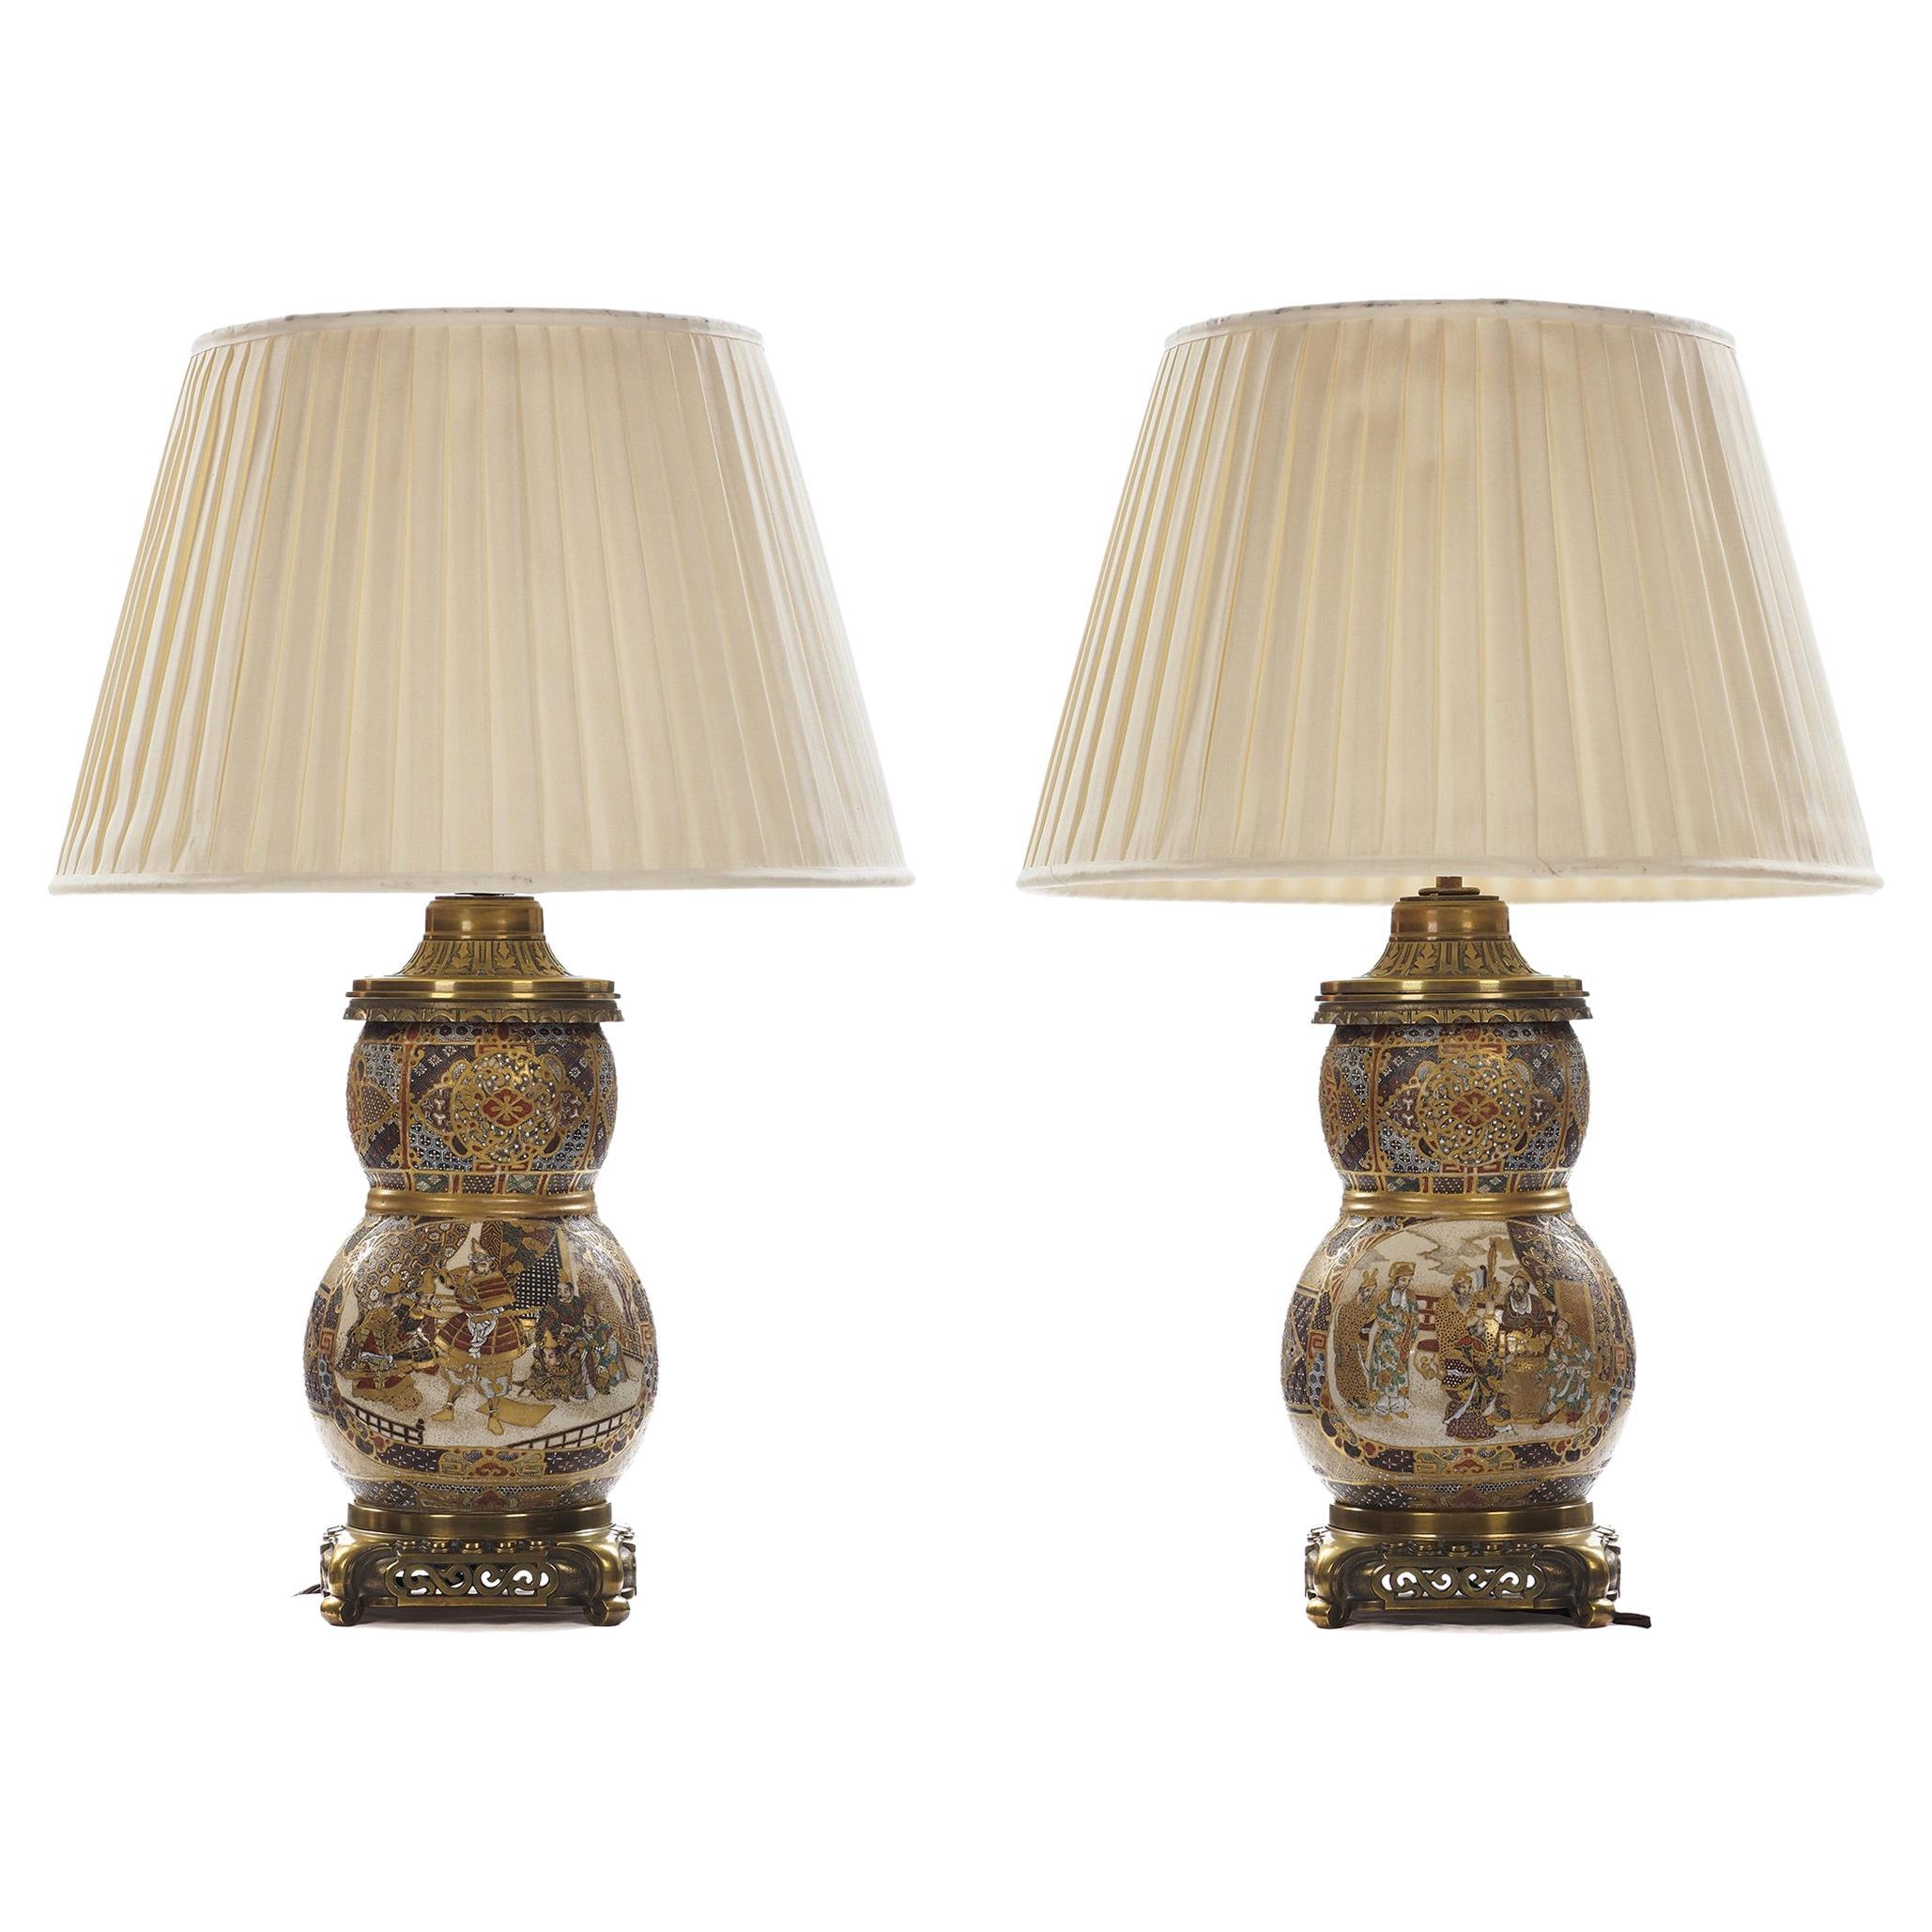 Pair of 19th Century Japanese Porcelain Lamps on French Gilded Bases